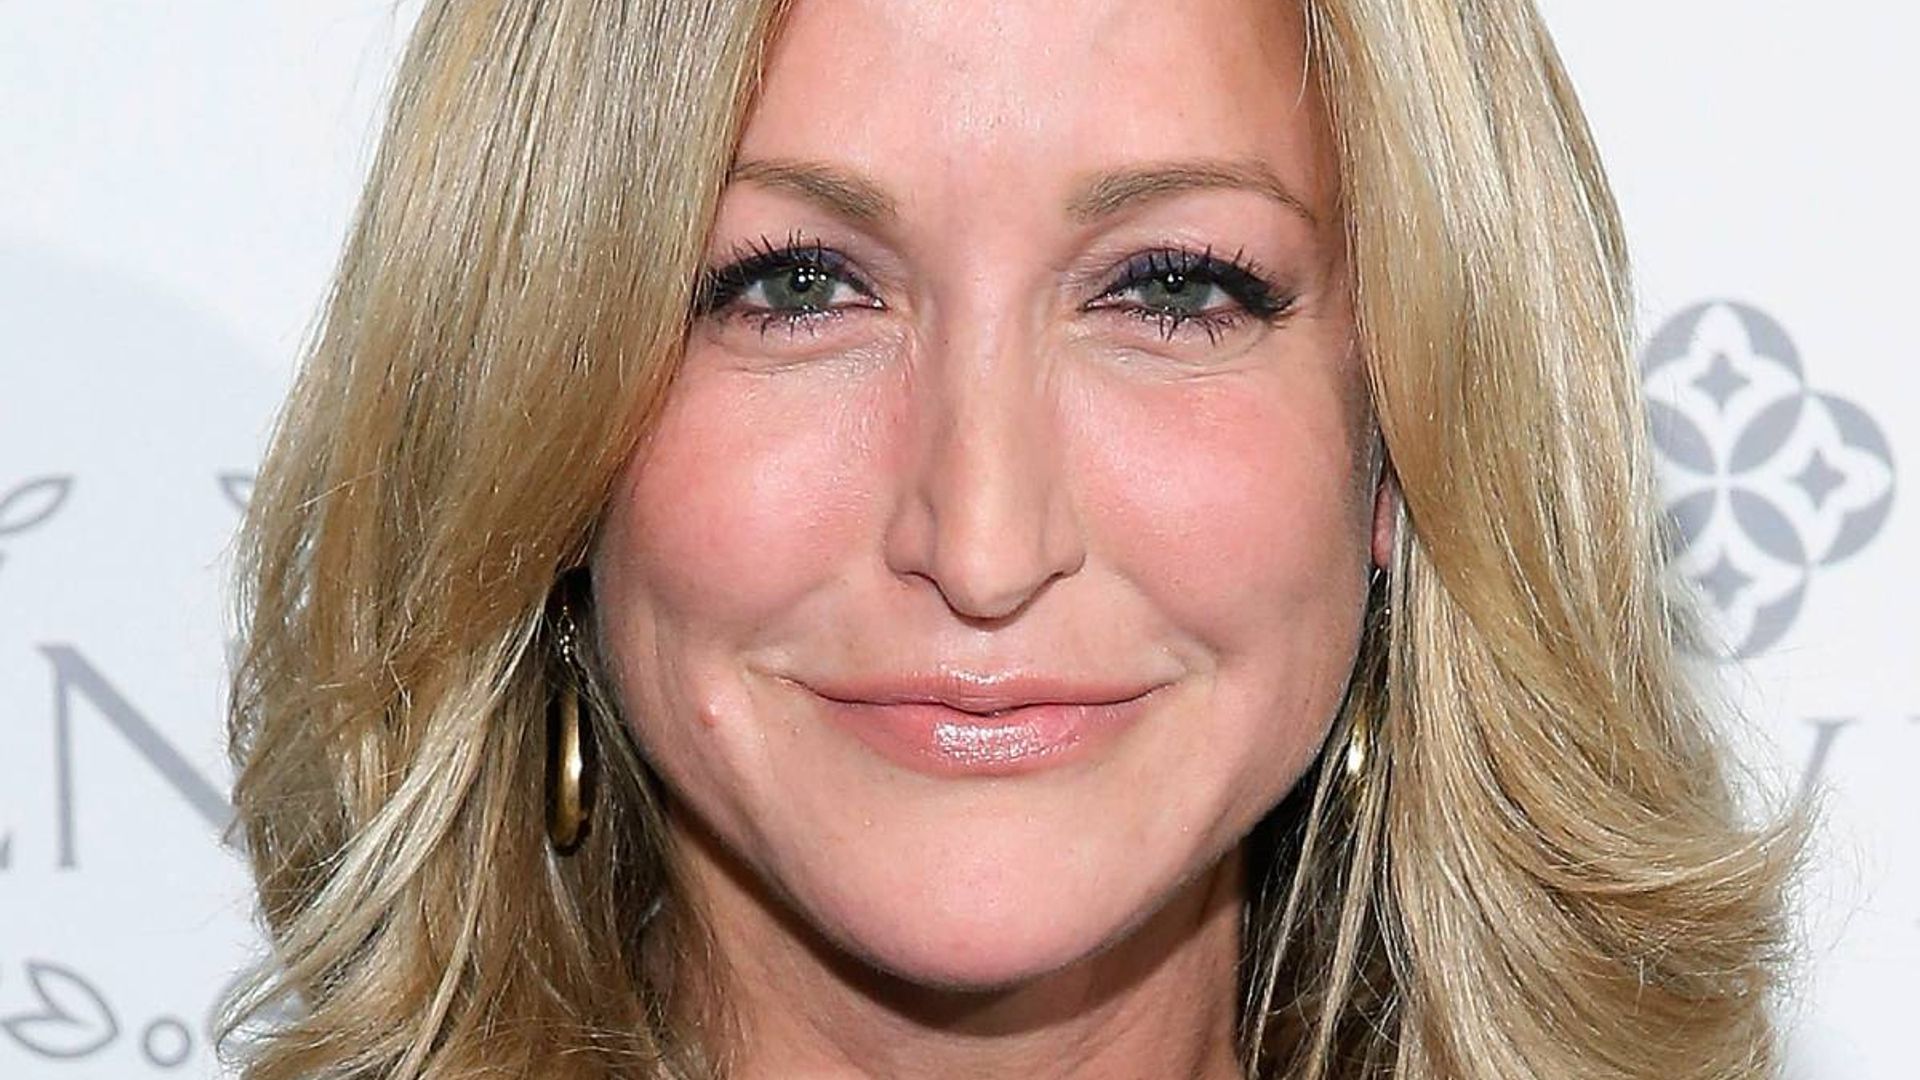 Lara Spencer shares breathtaking beach photo during evening with famous friends